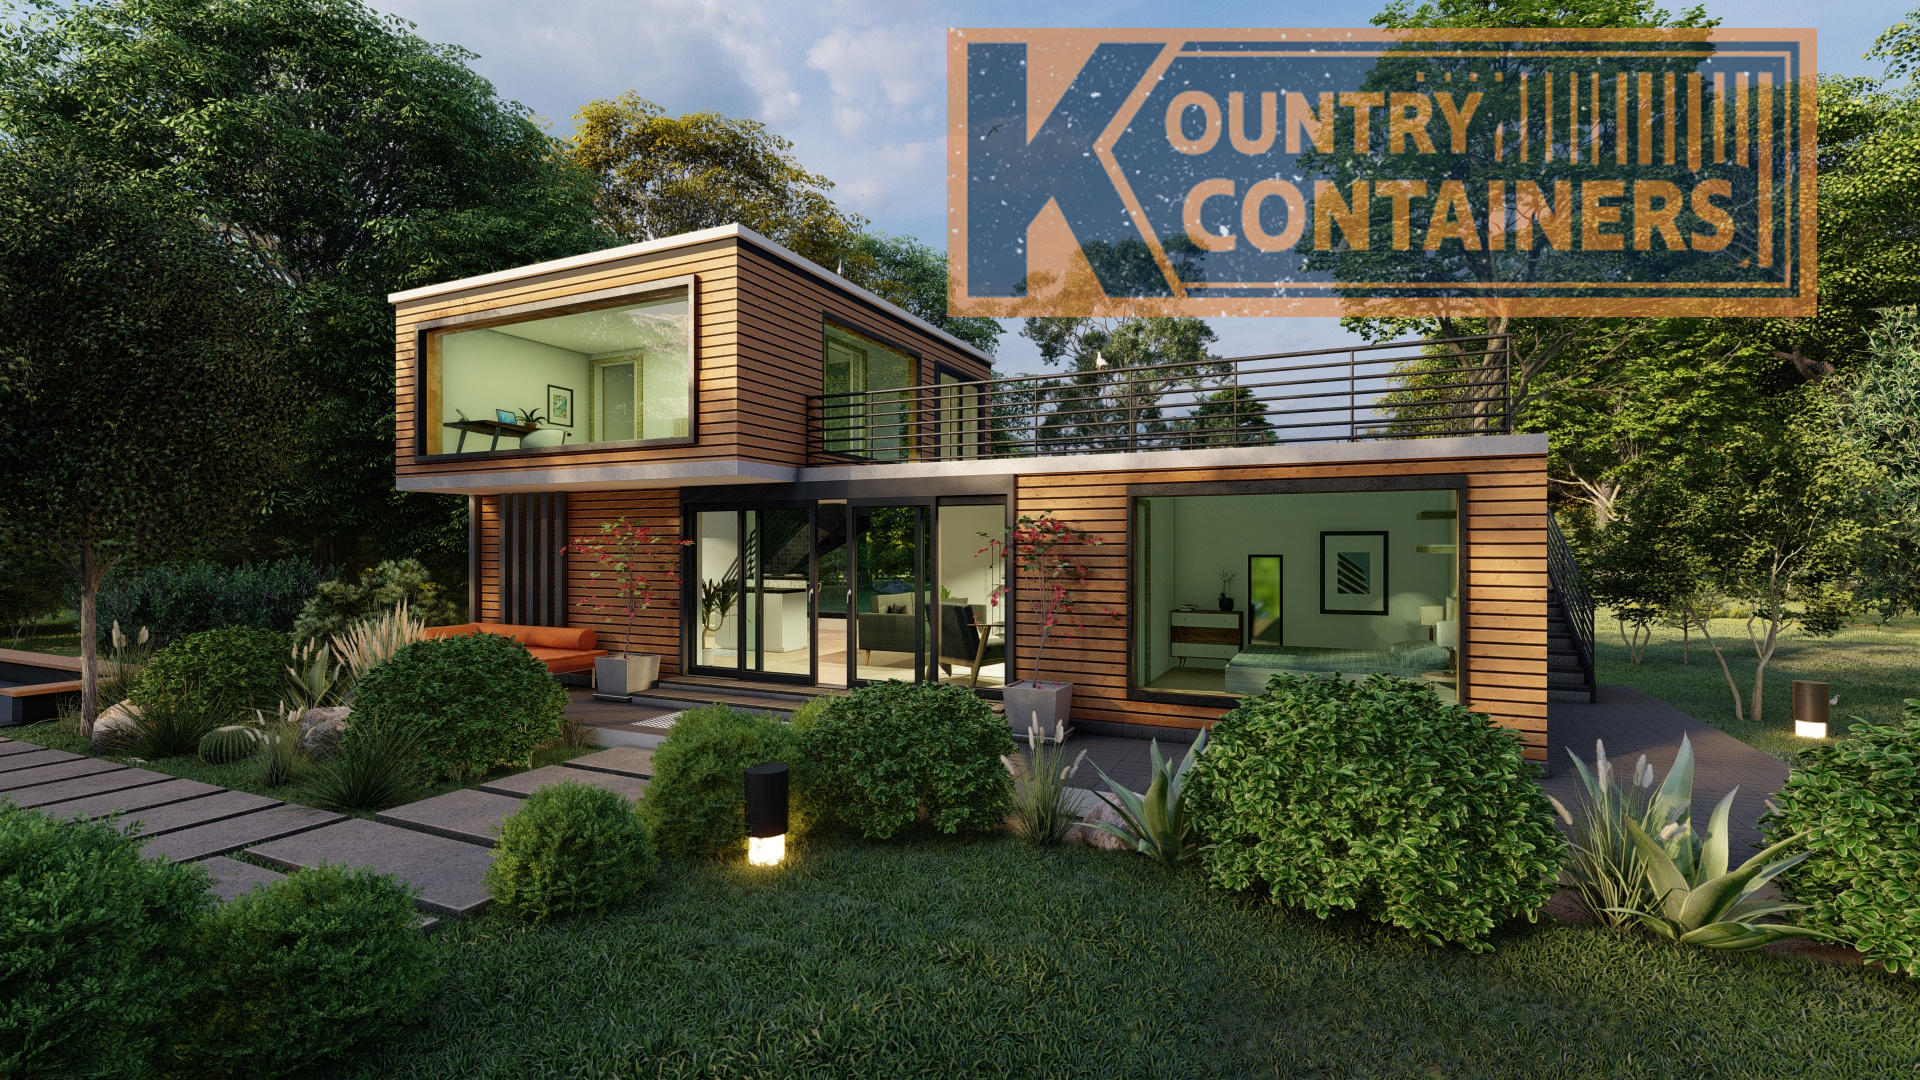 Kountry Containers